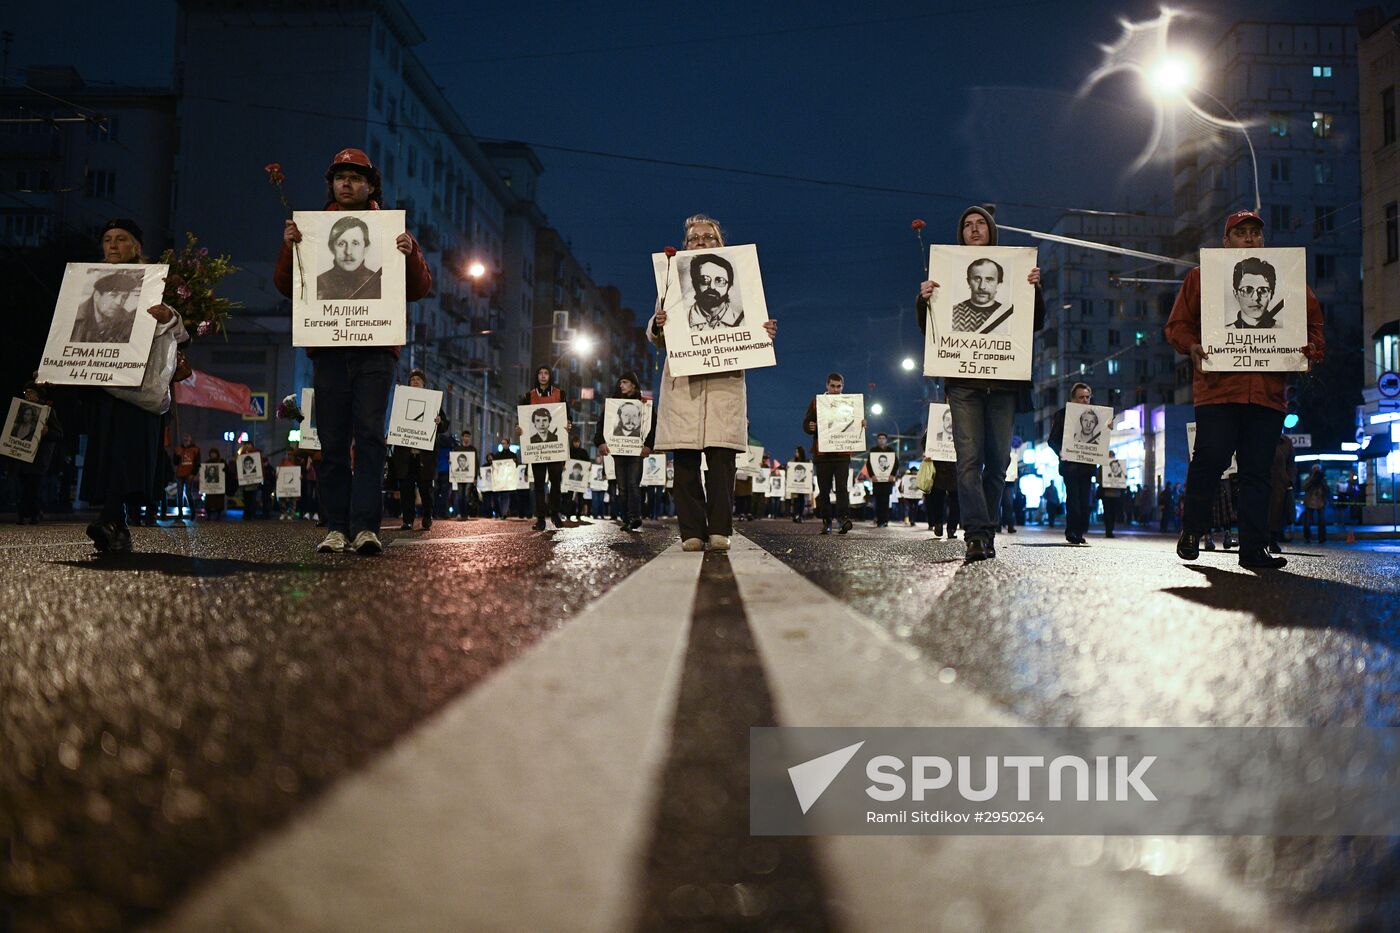 Rally marks 23rd anniversary of October 3-4, 1993 events in Moscow